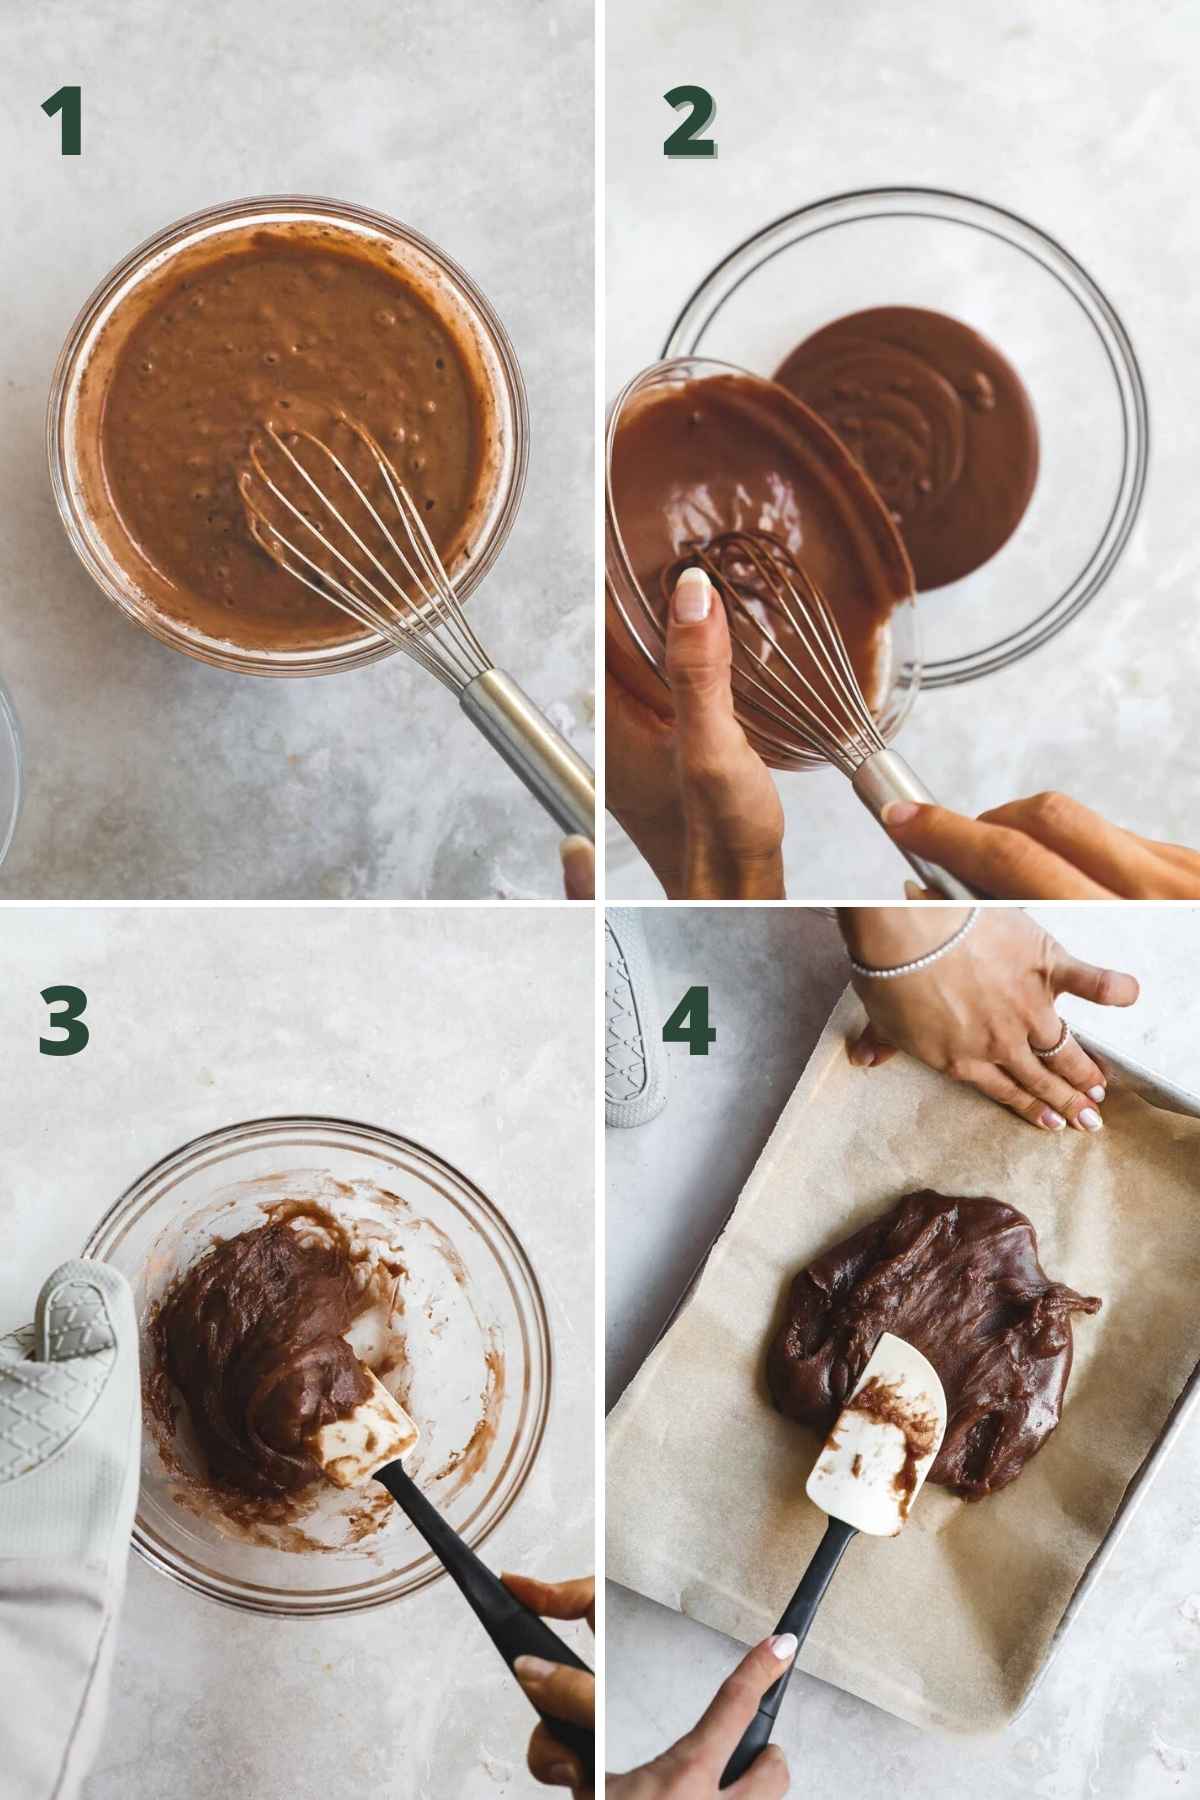 Steps to make chocolate truffled-stuffed mochi, including mixing the mochiko flour, sugar and cocoa powder; adding water; microwaving the mochi; and spreading the mochi onto parchment paper.